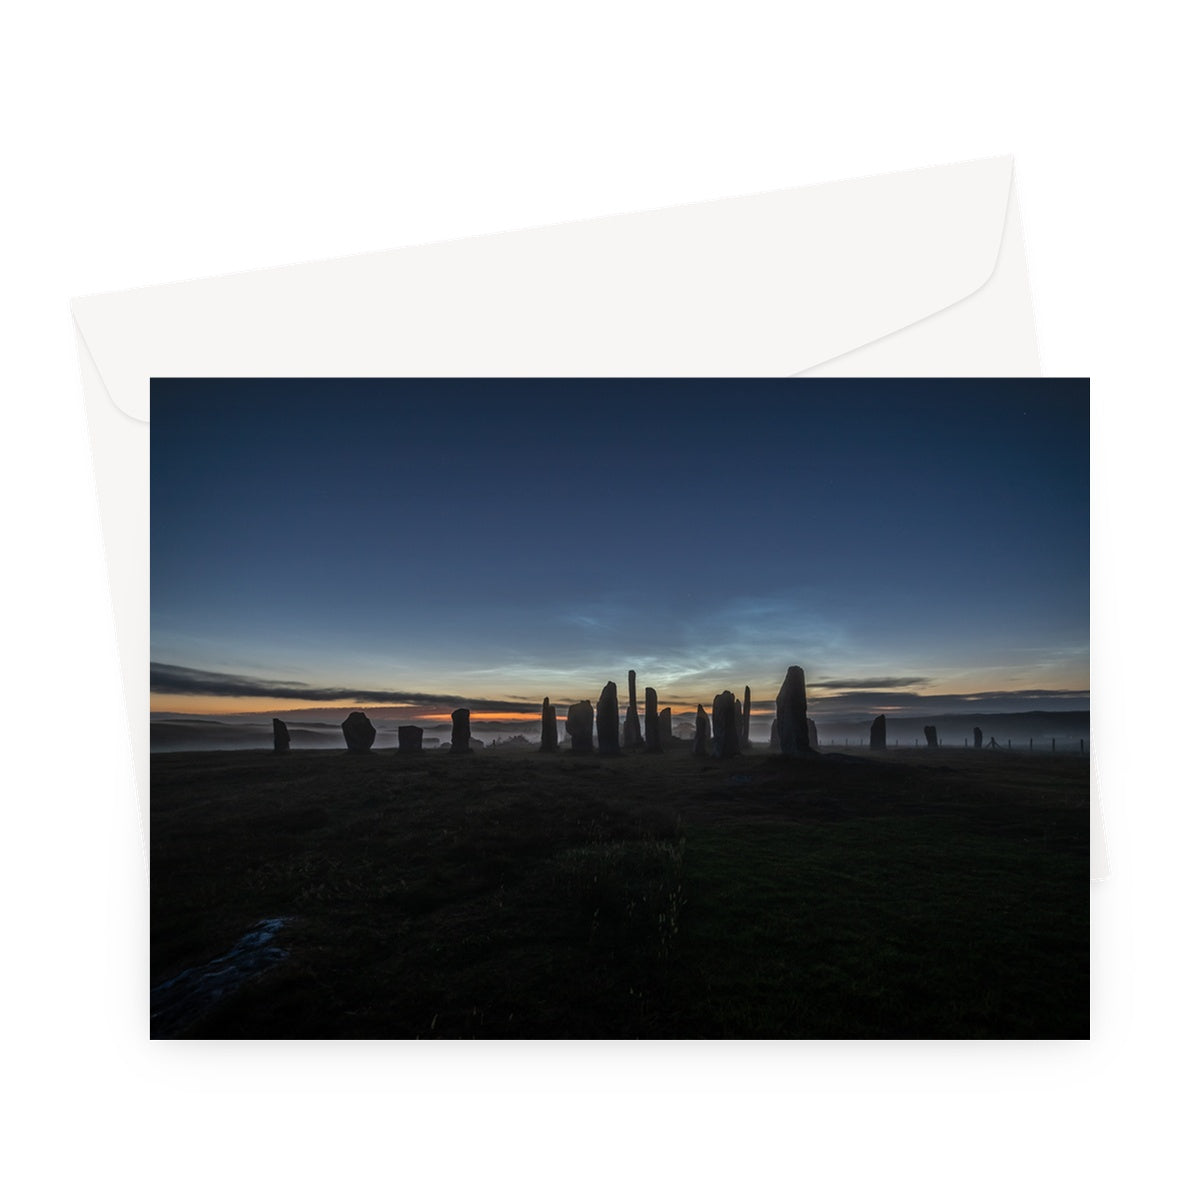 Callanish Stones and Noctilucent Clouds Greeting Card